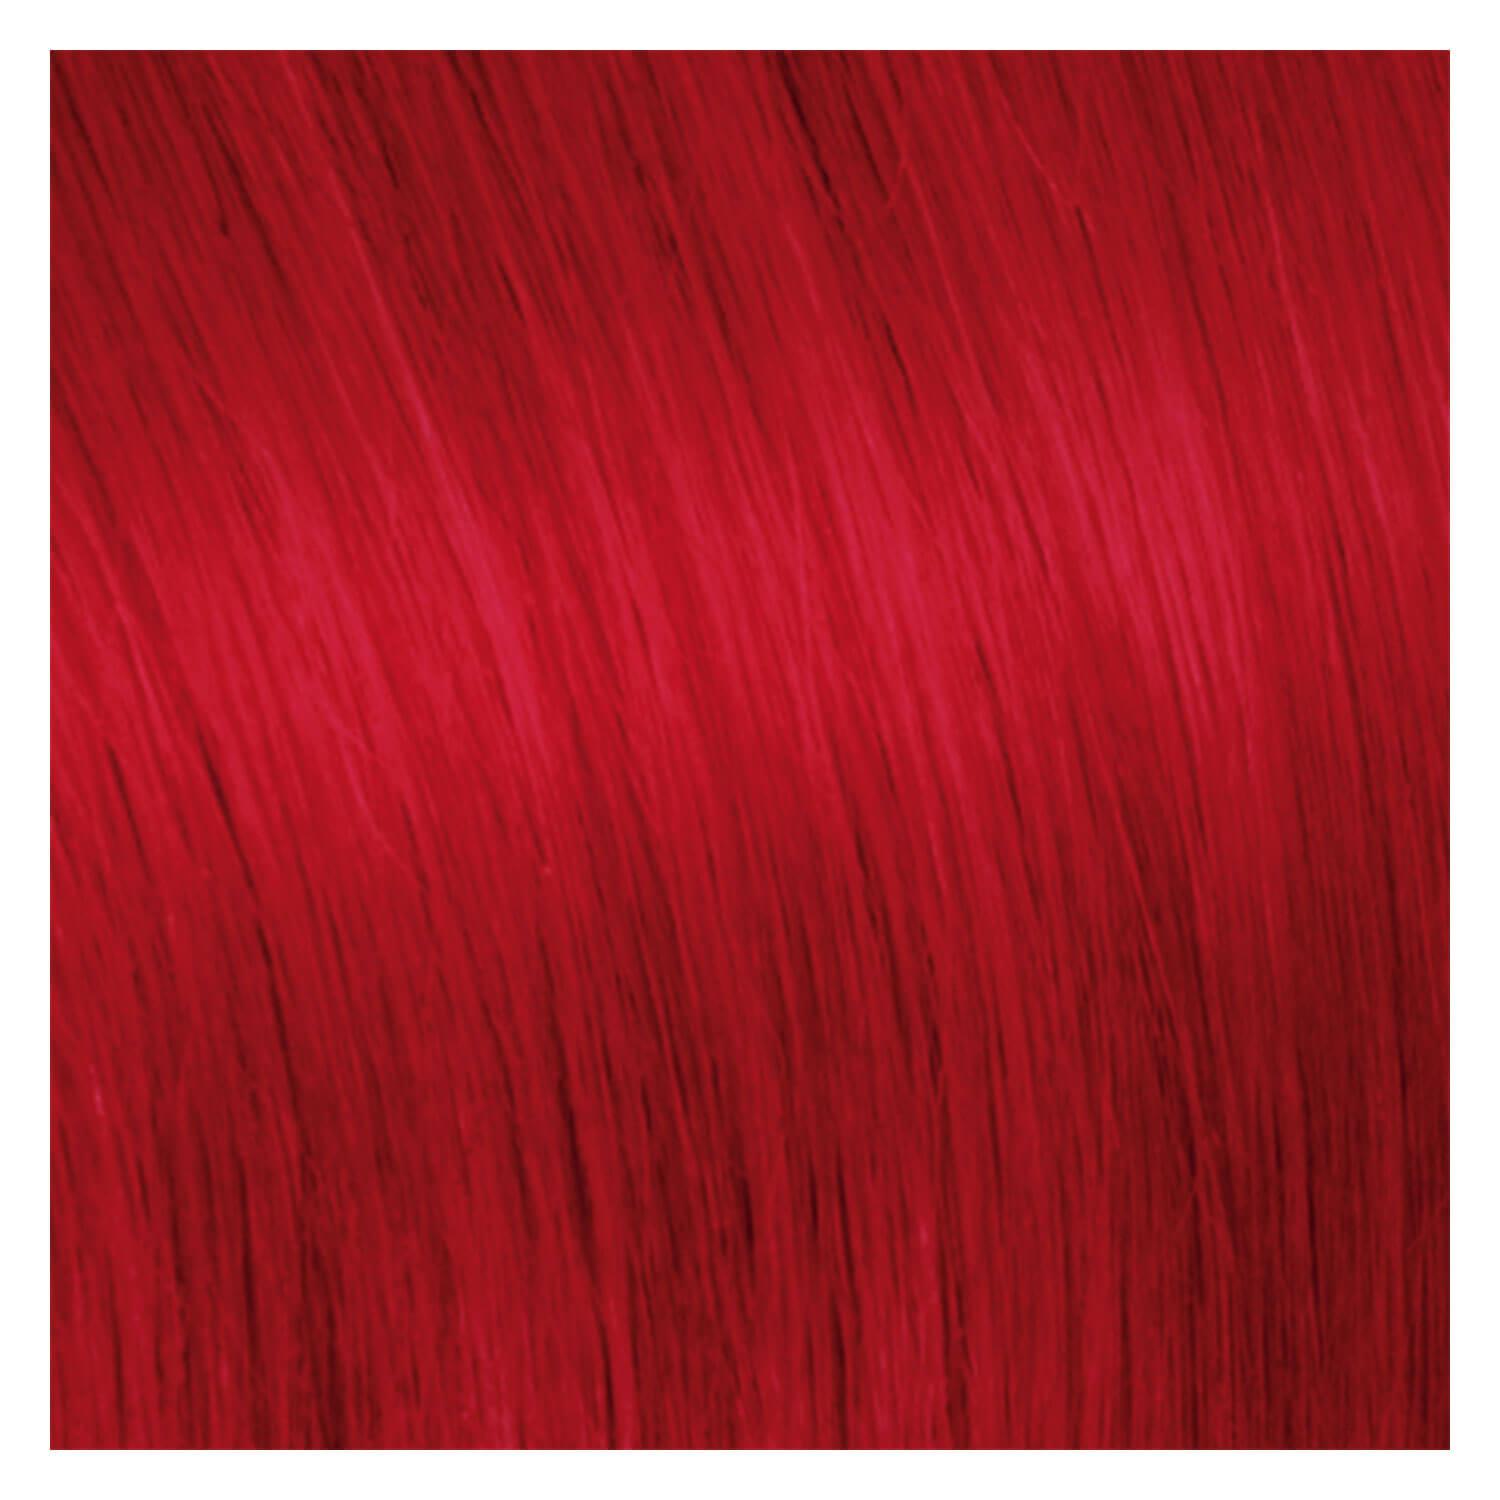 SHE Clip In-System Hair Extensions - Red 40cm